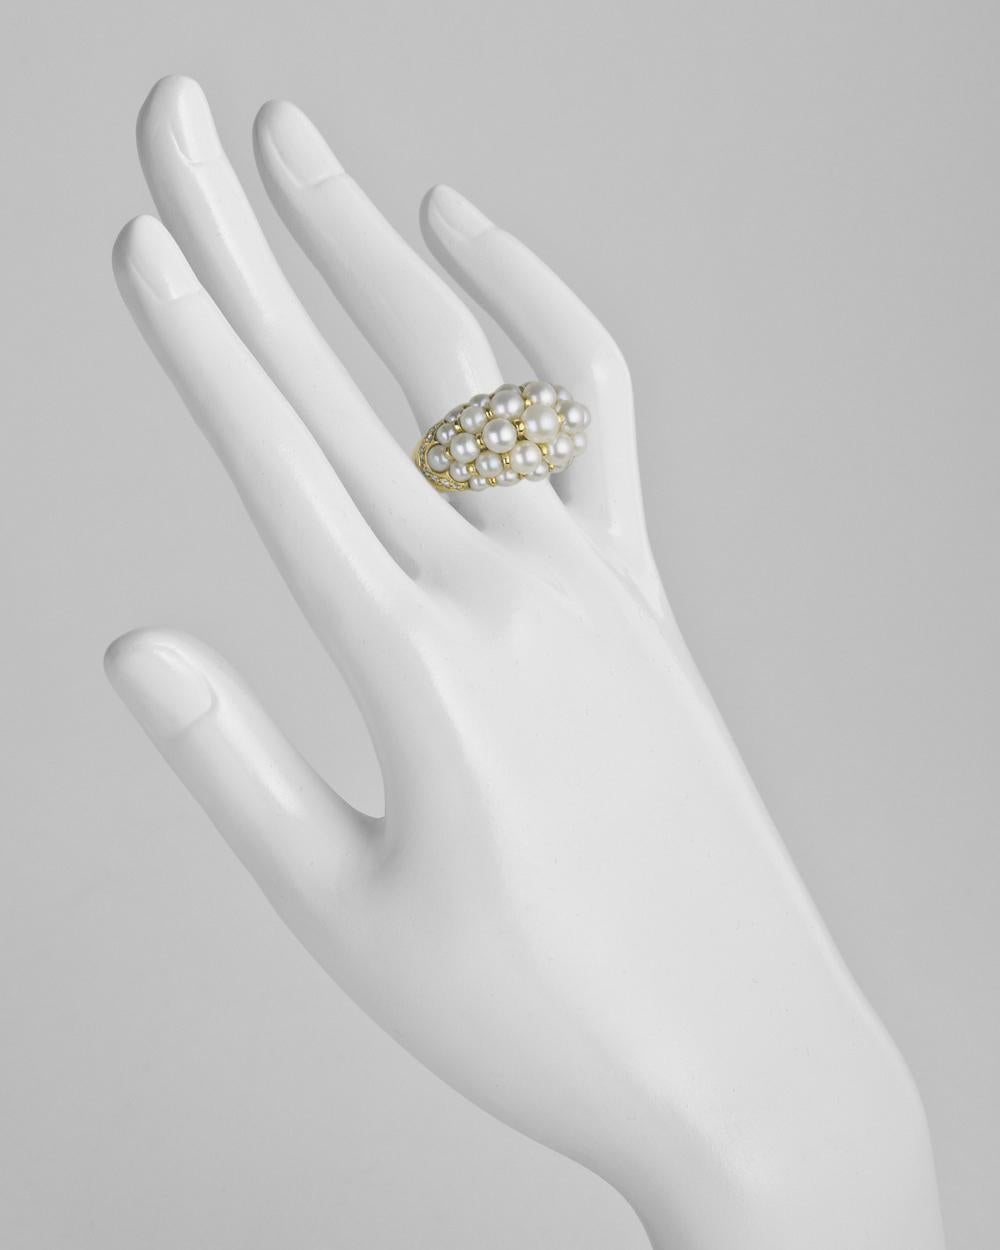 Domed cocktail ring, featuring cultured white round pearls of graduated size, accented by round-cut diamonds at either side, mounted in 18k yellow gold, numbered '1994' 'B69659' and signed 'Cartier'. Size 6.75.
